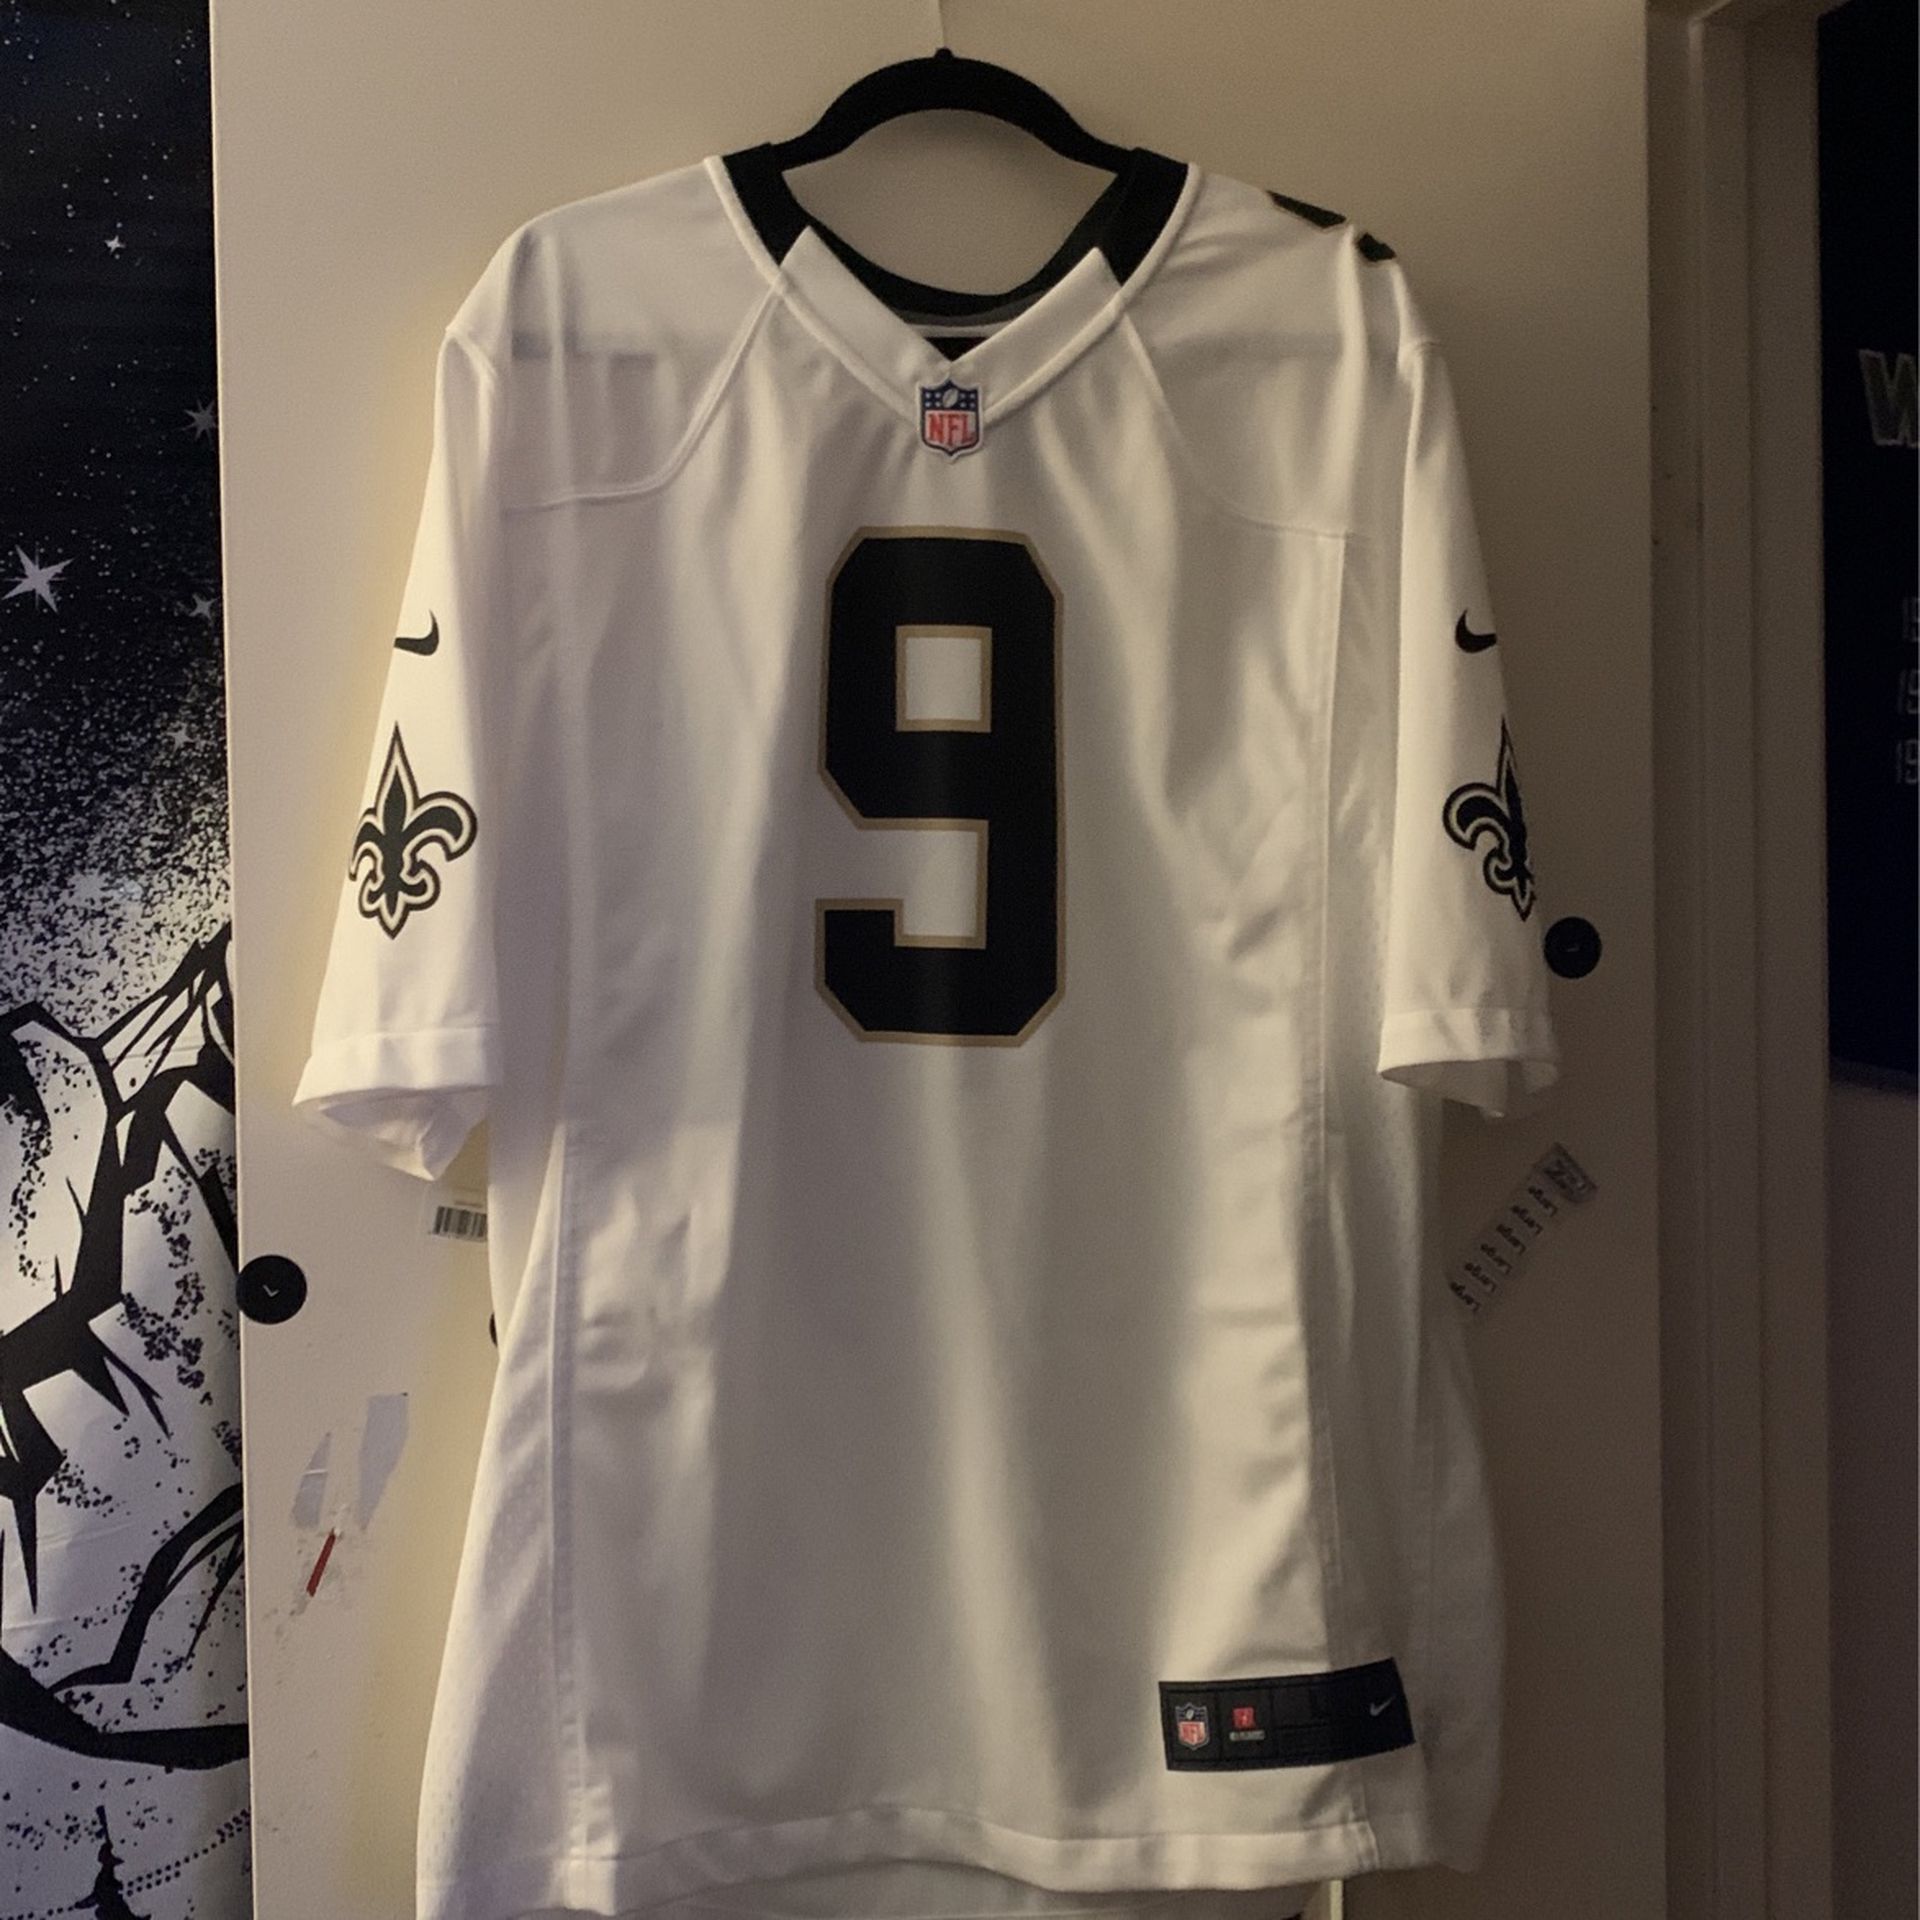 Authentic Mens Large Drew Brees Home Jersey.